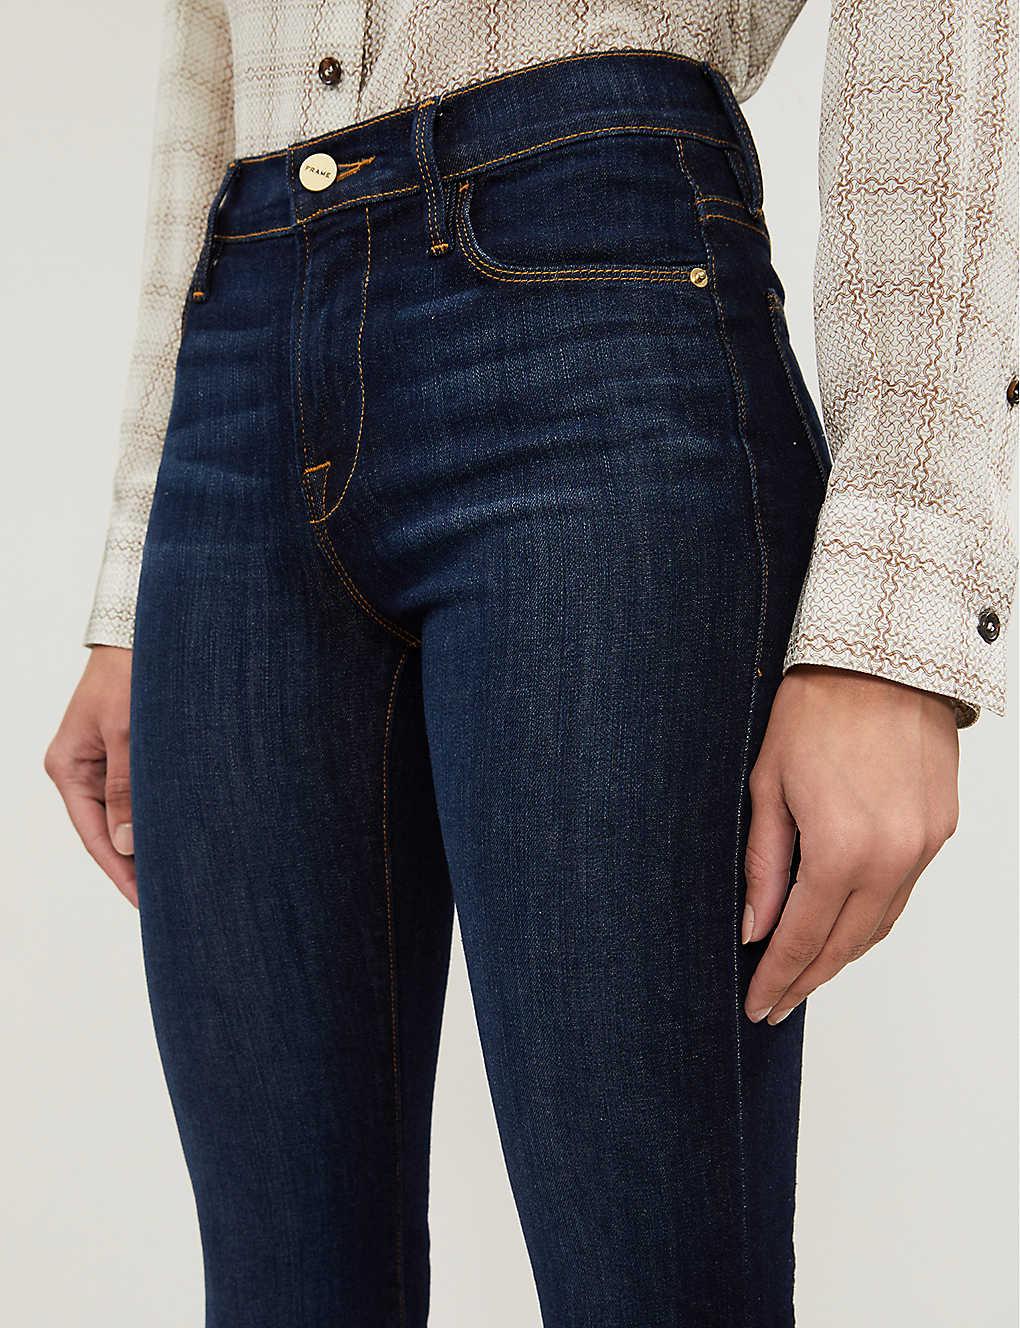 FRAME Le Pixie Flare Jeans in Blue